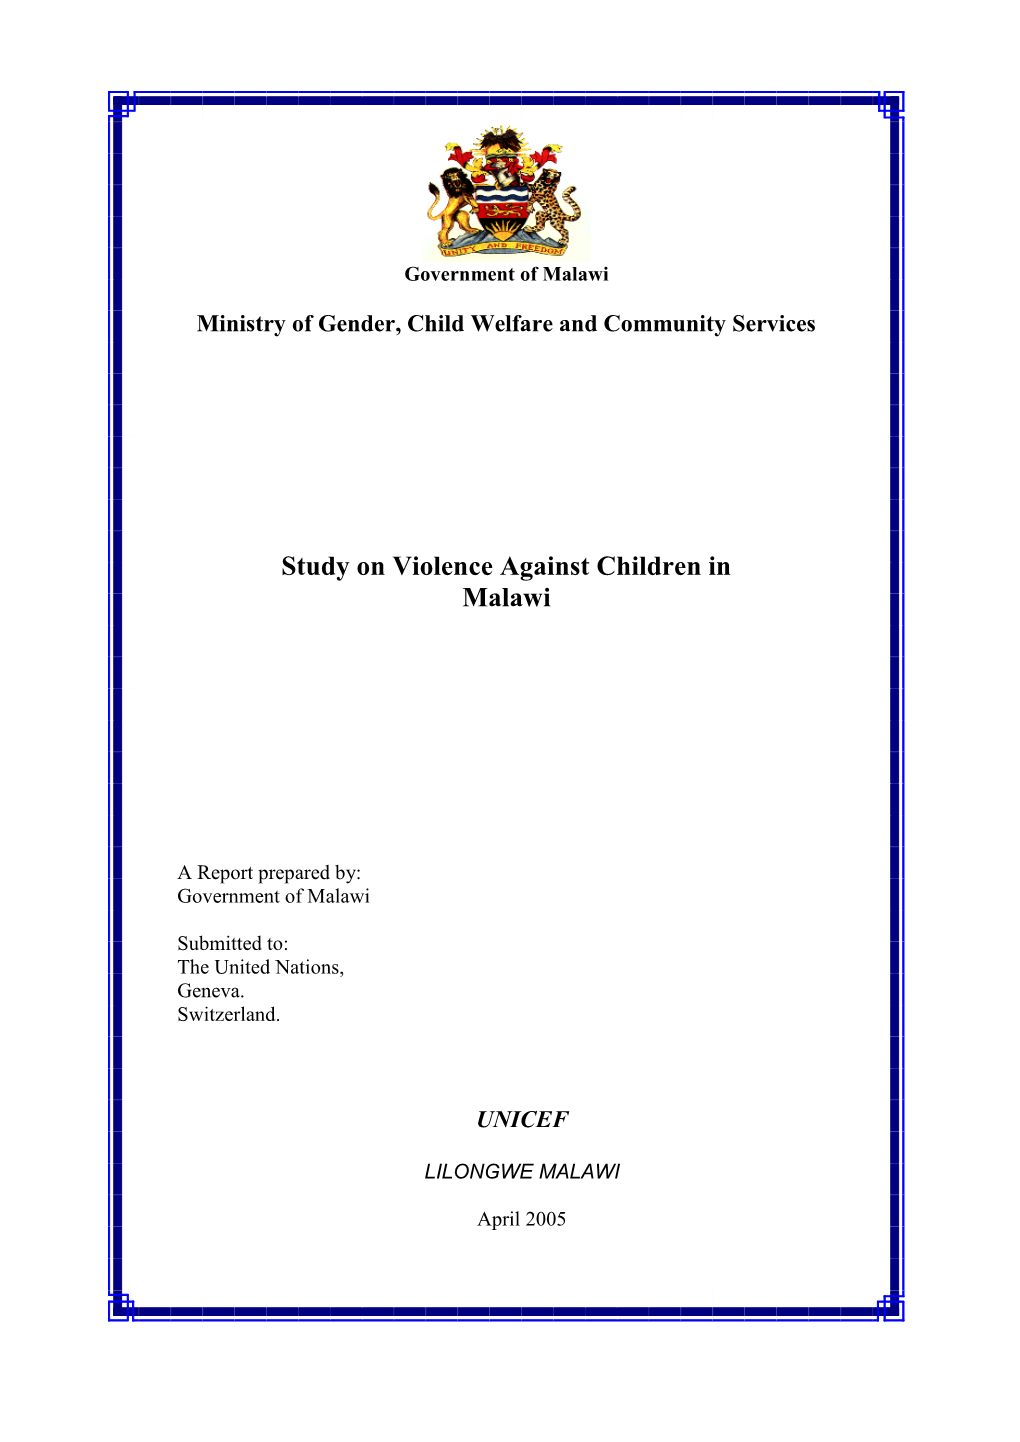 Study on Violence Against Children in Malawi